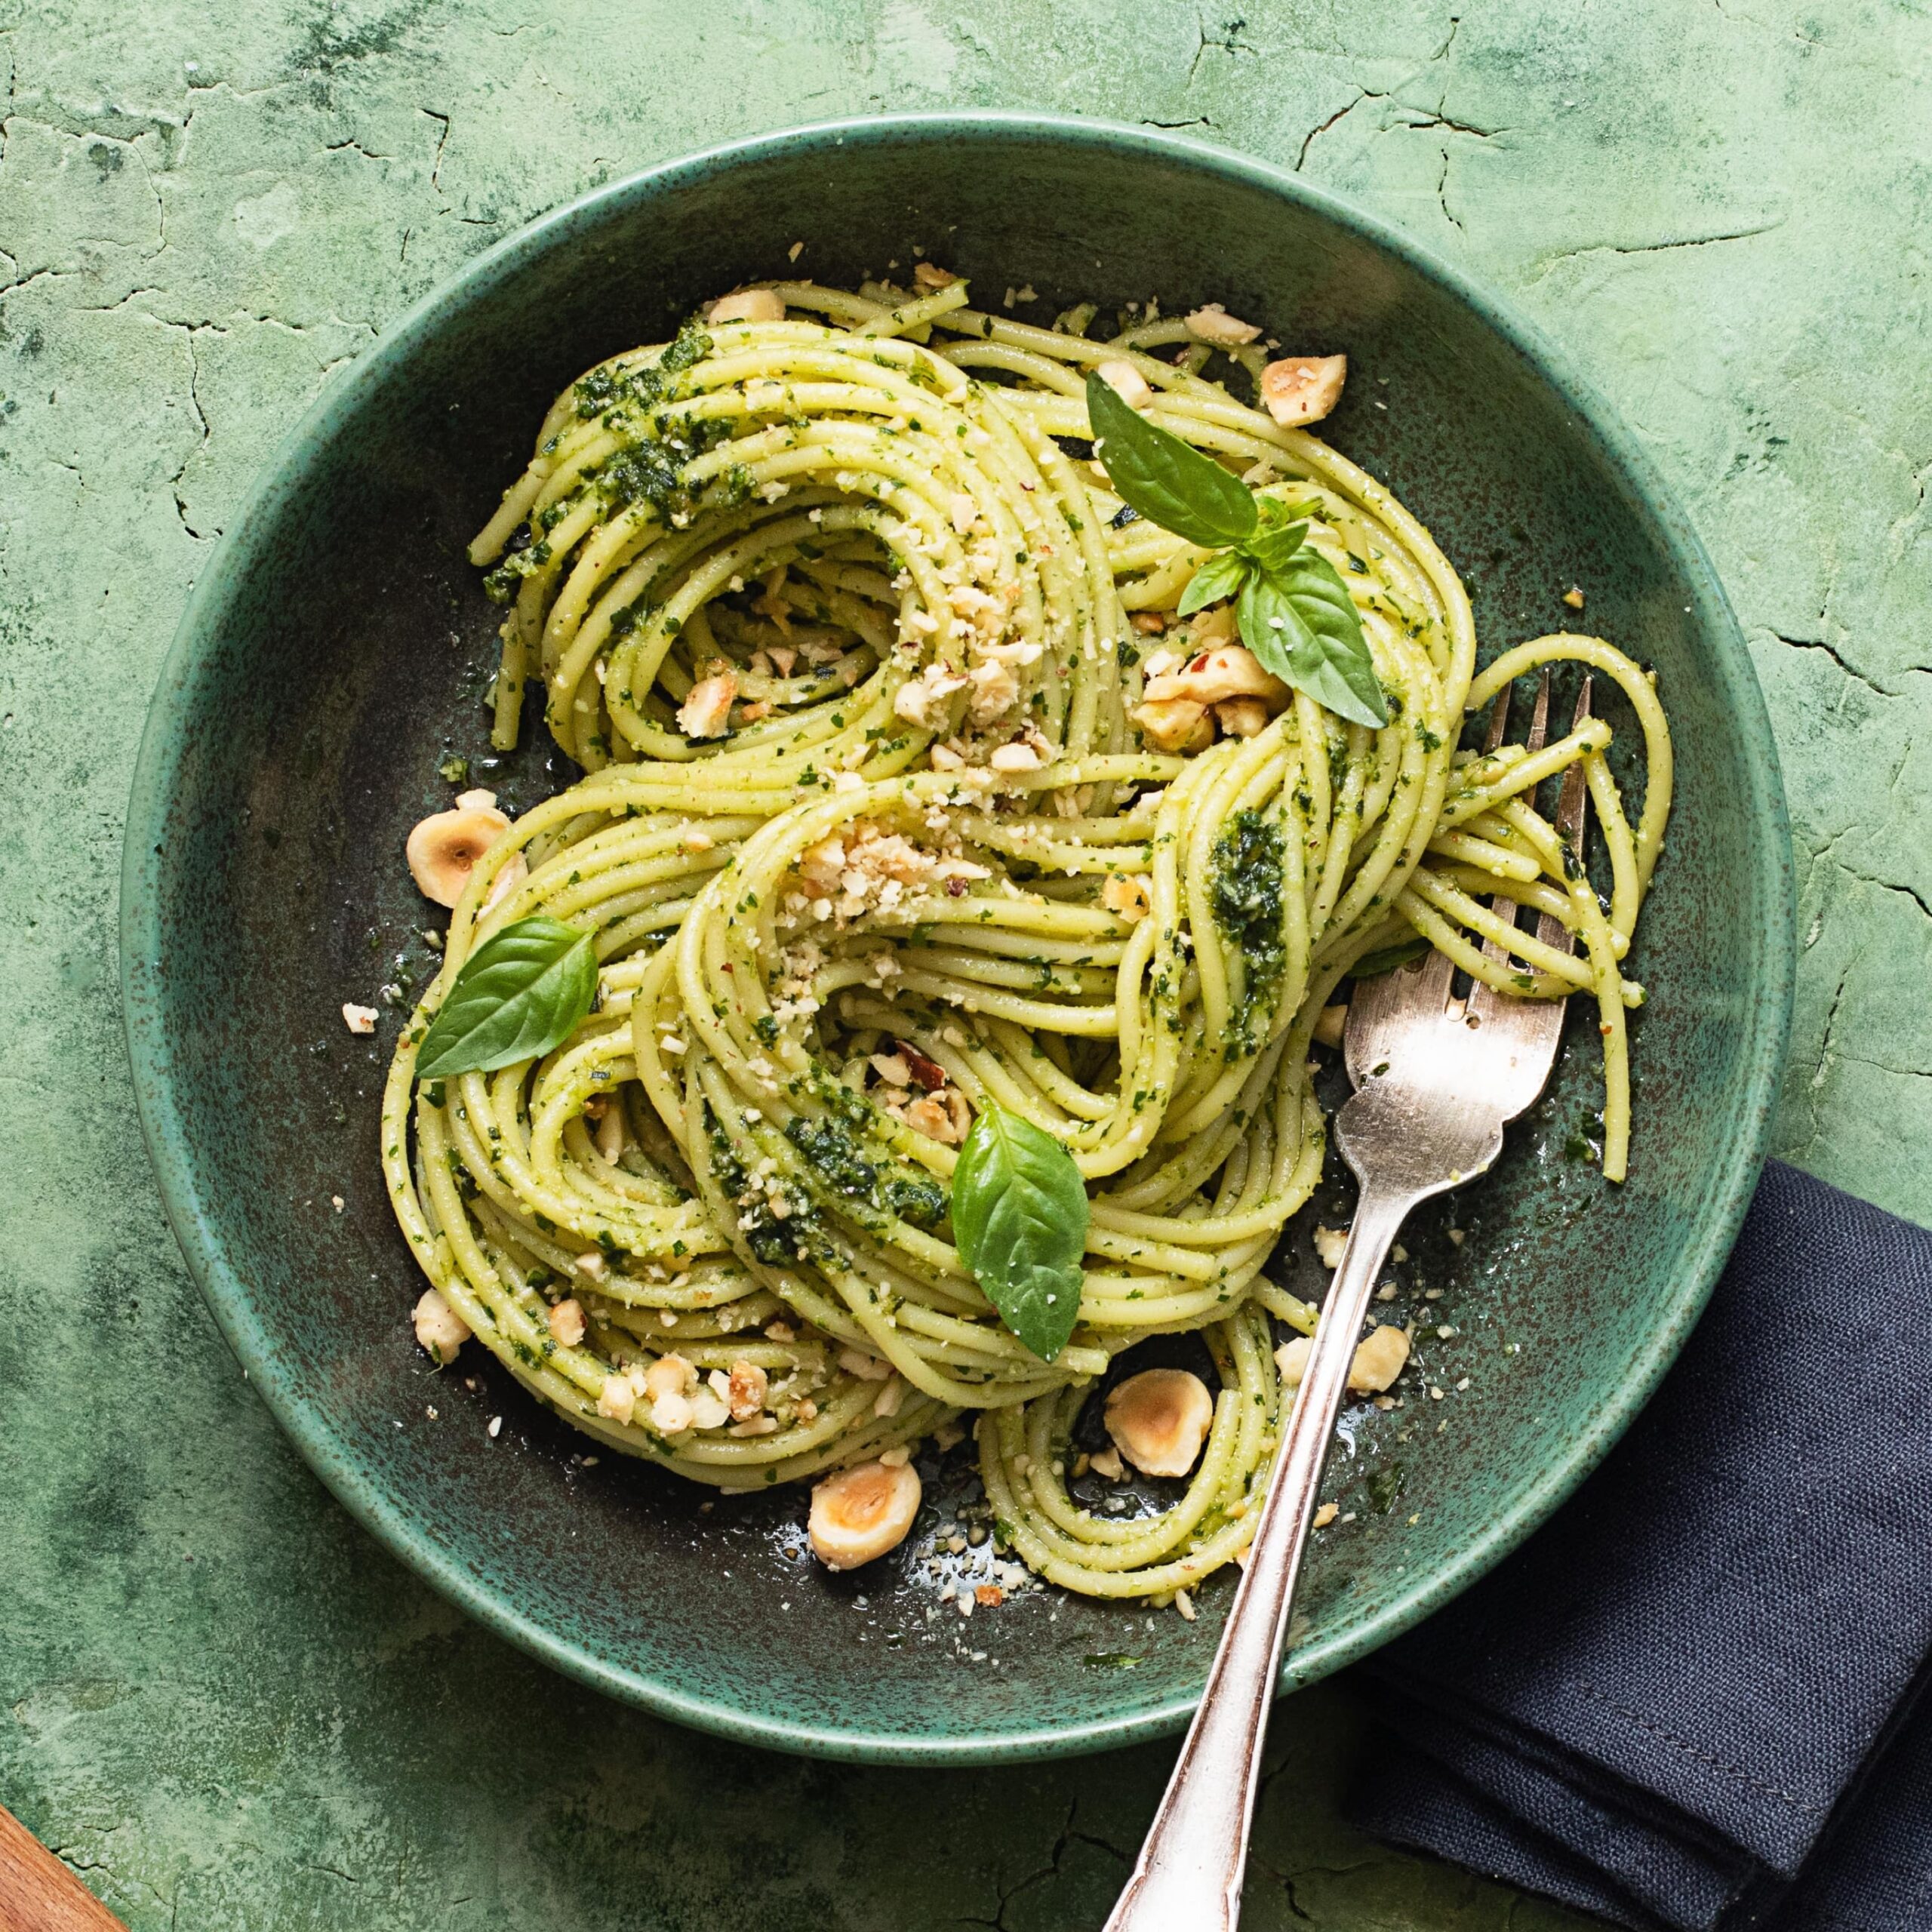 Thin pasta with hazelnut pesto, crushed hazelnuts, and herbs in serving dish